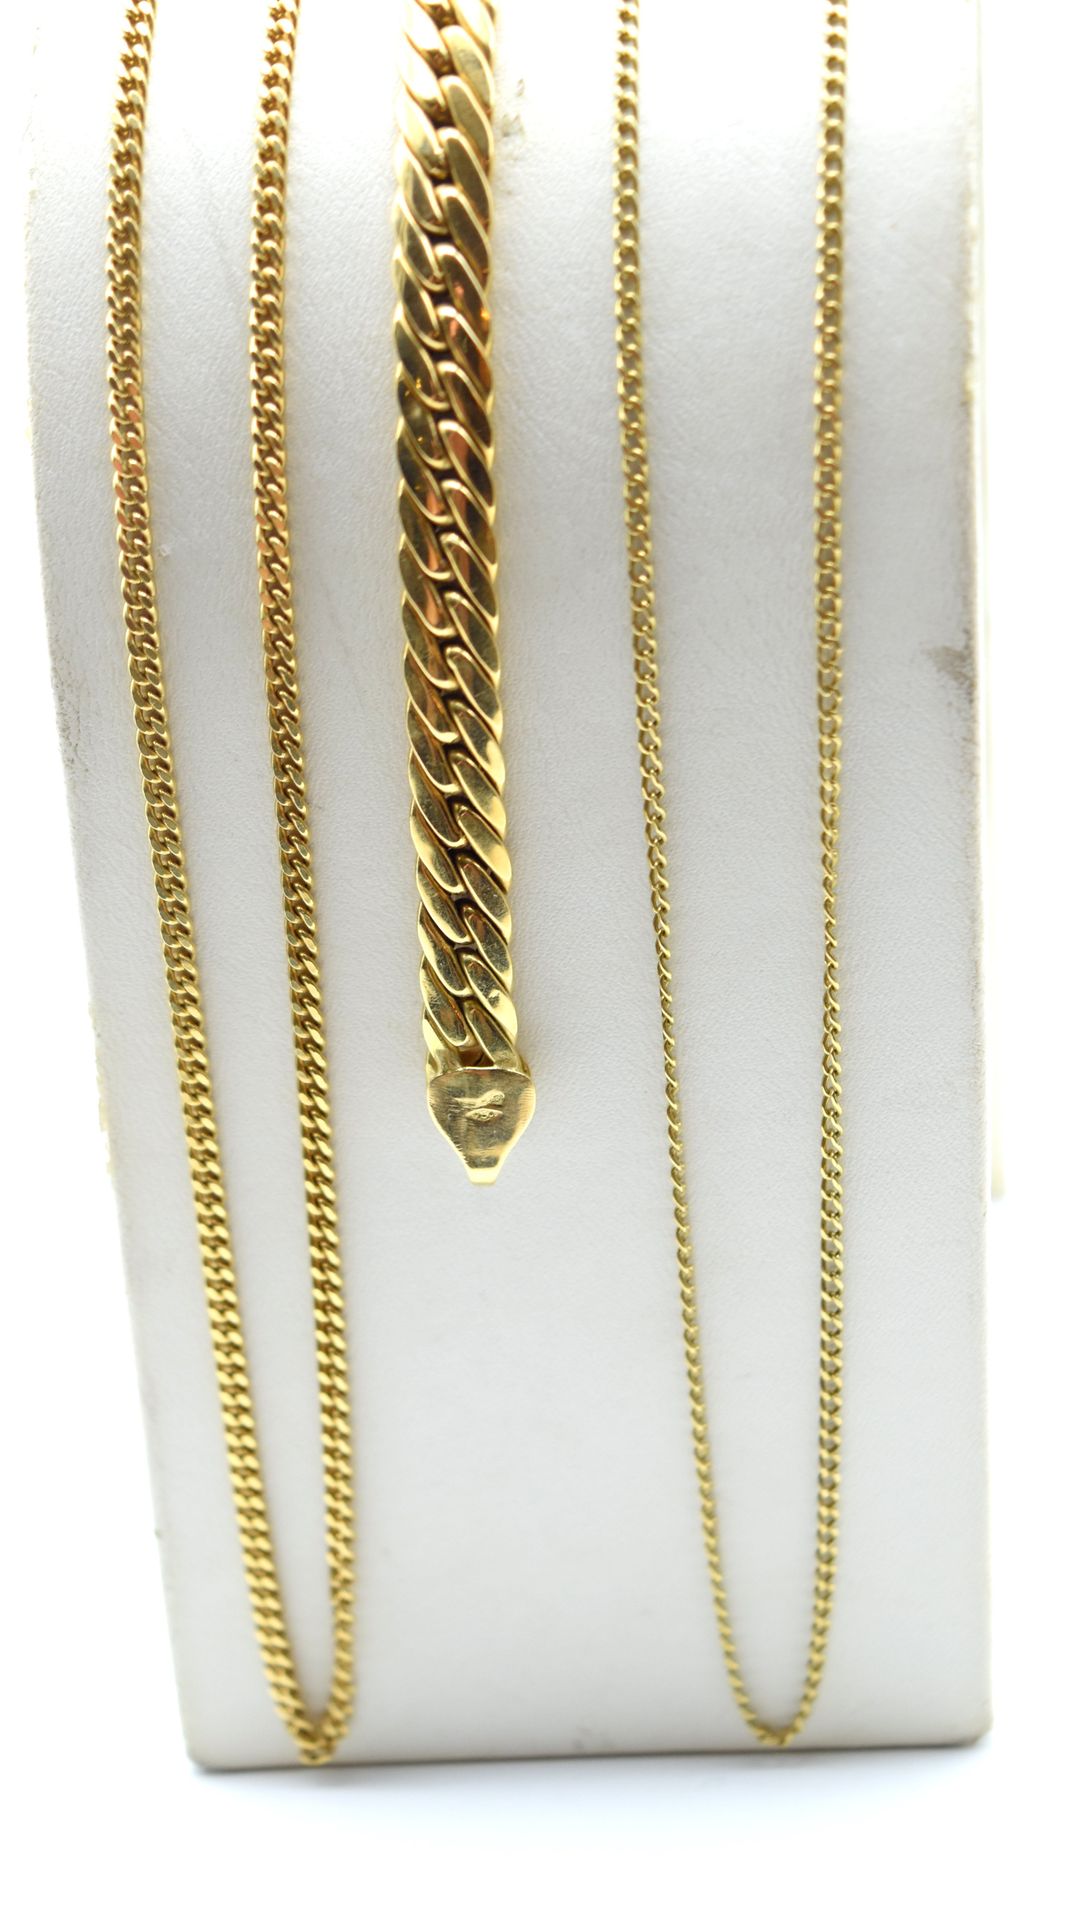 Null 2 necklaces and bracelet in 18 ct yellow gold - 27.5 g (49, 45 & 19 cm) \nB&hellip;